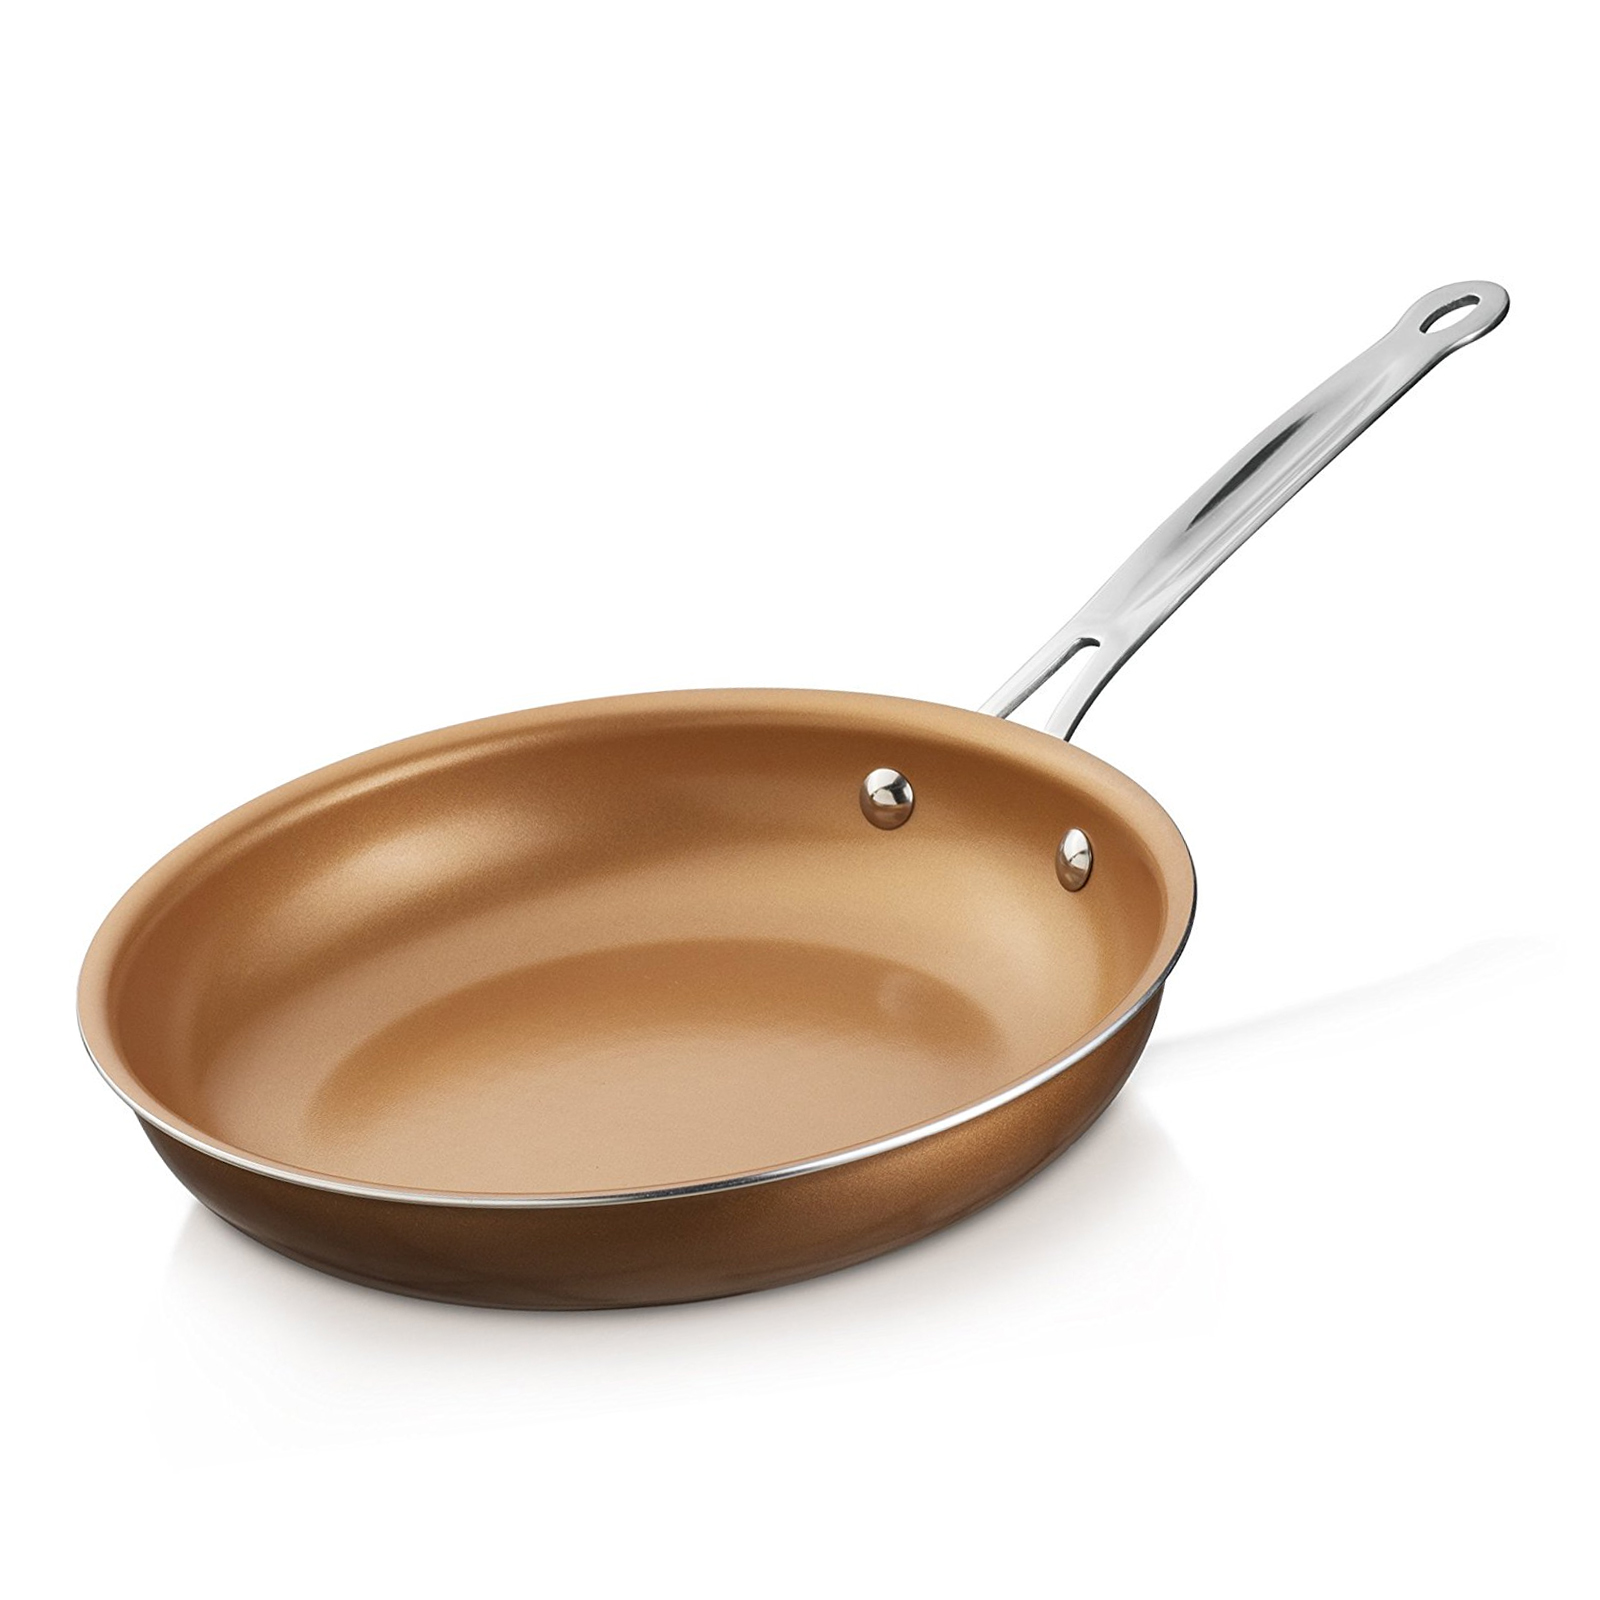 Brentwood 10" Induction Copper Frying Pan Set with Non-Stick, Ceramic Coating